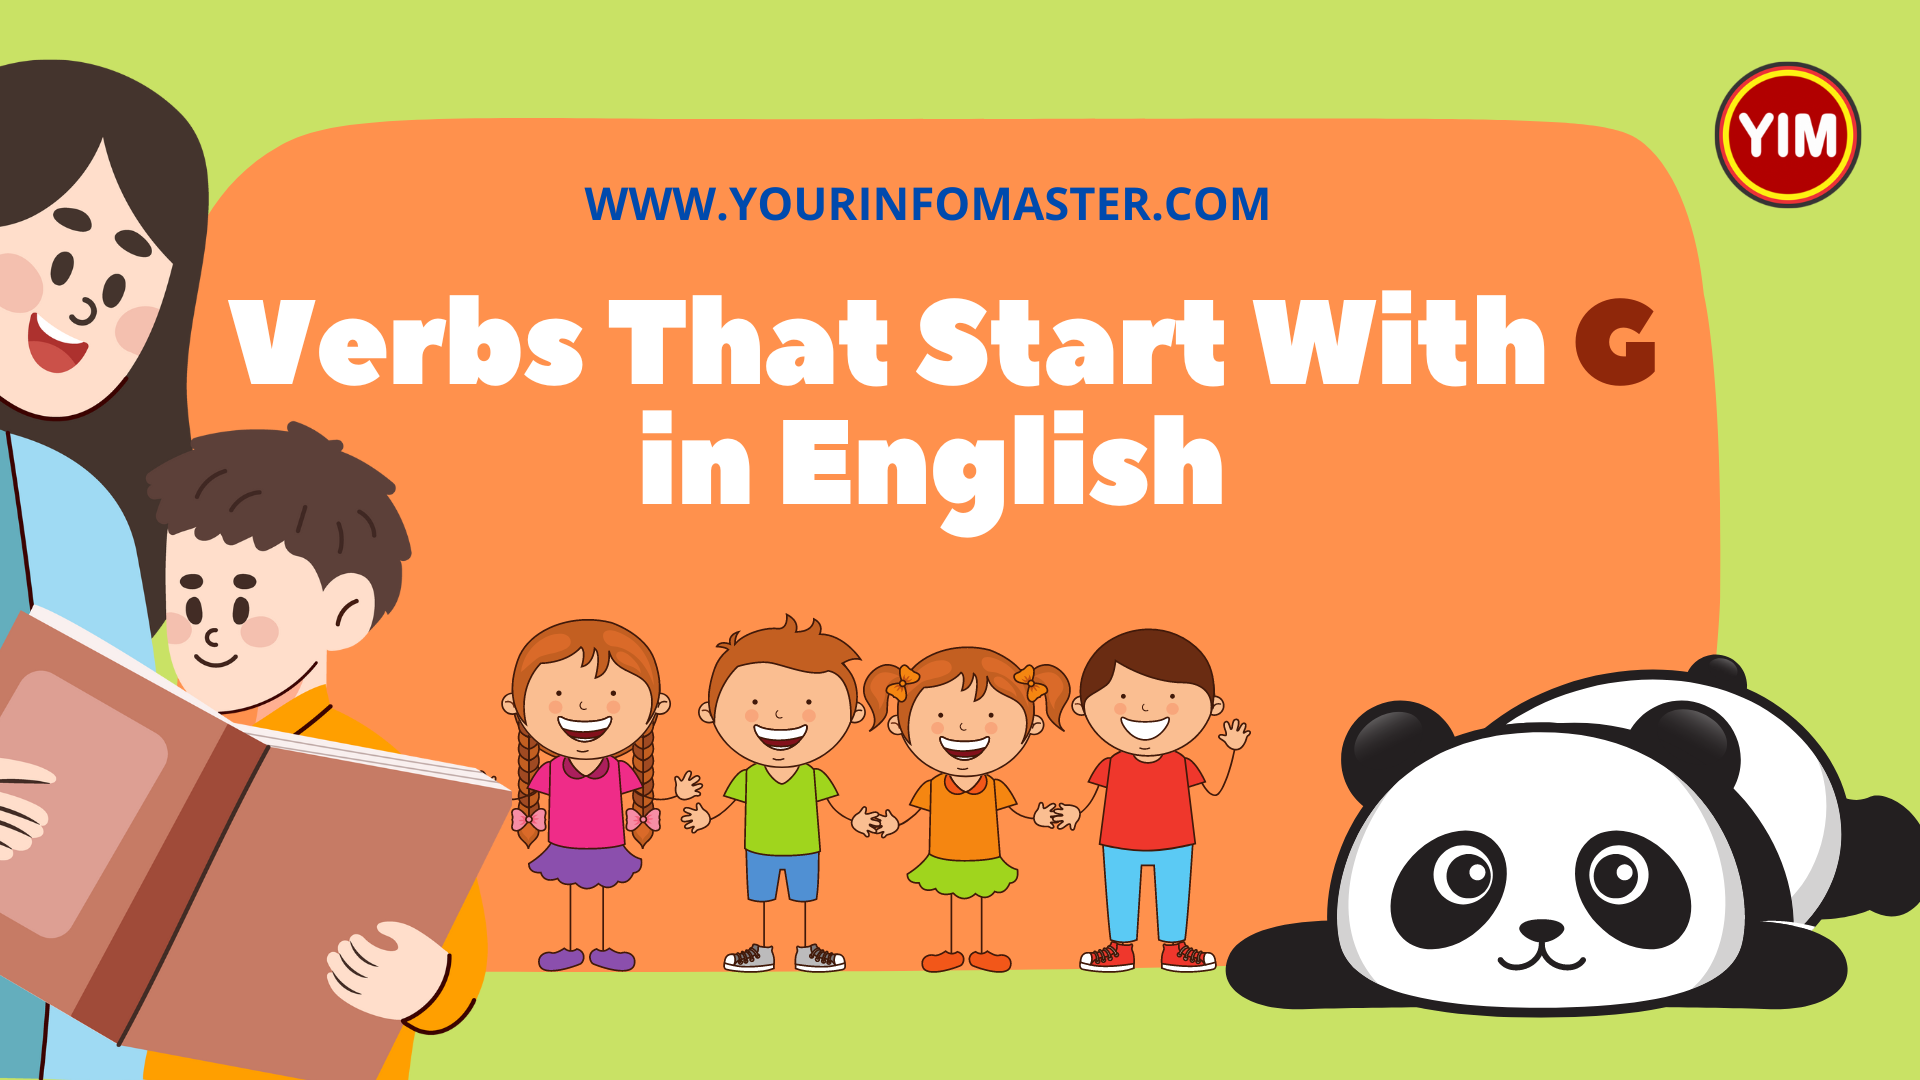 5 Letter Verbs, 5 Letter Verbs Starting With G, Action Words, Action Words That Start With G, English, English Grammar, English Vocabulary, English Words, G Action Words, G Verbs, G Verbs in English, List of Verbs That Start With G, Verbs List, Verbs That Start With G, Vocabulary, Words That Start with G